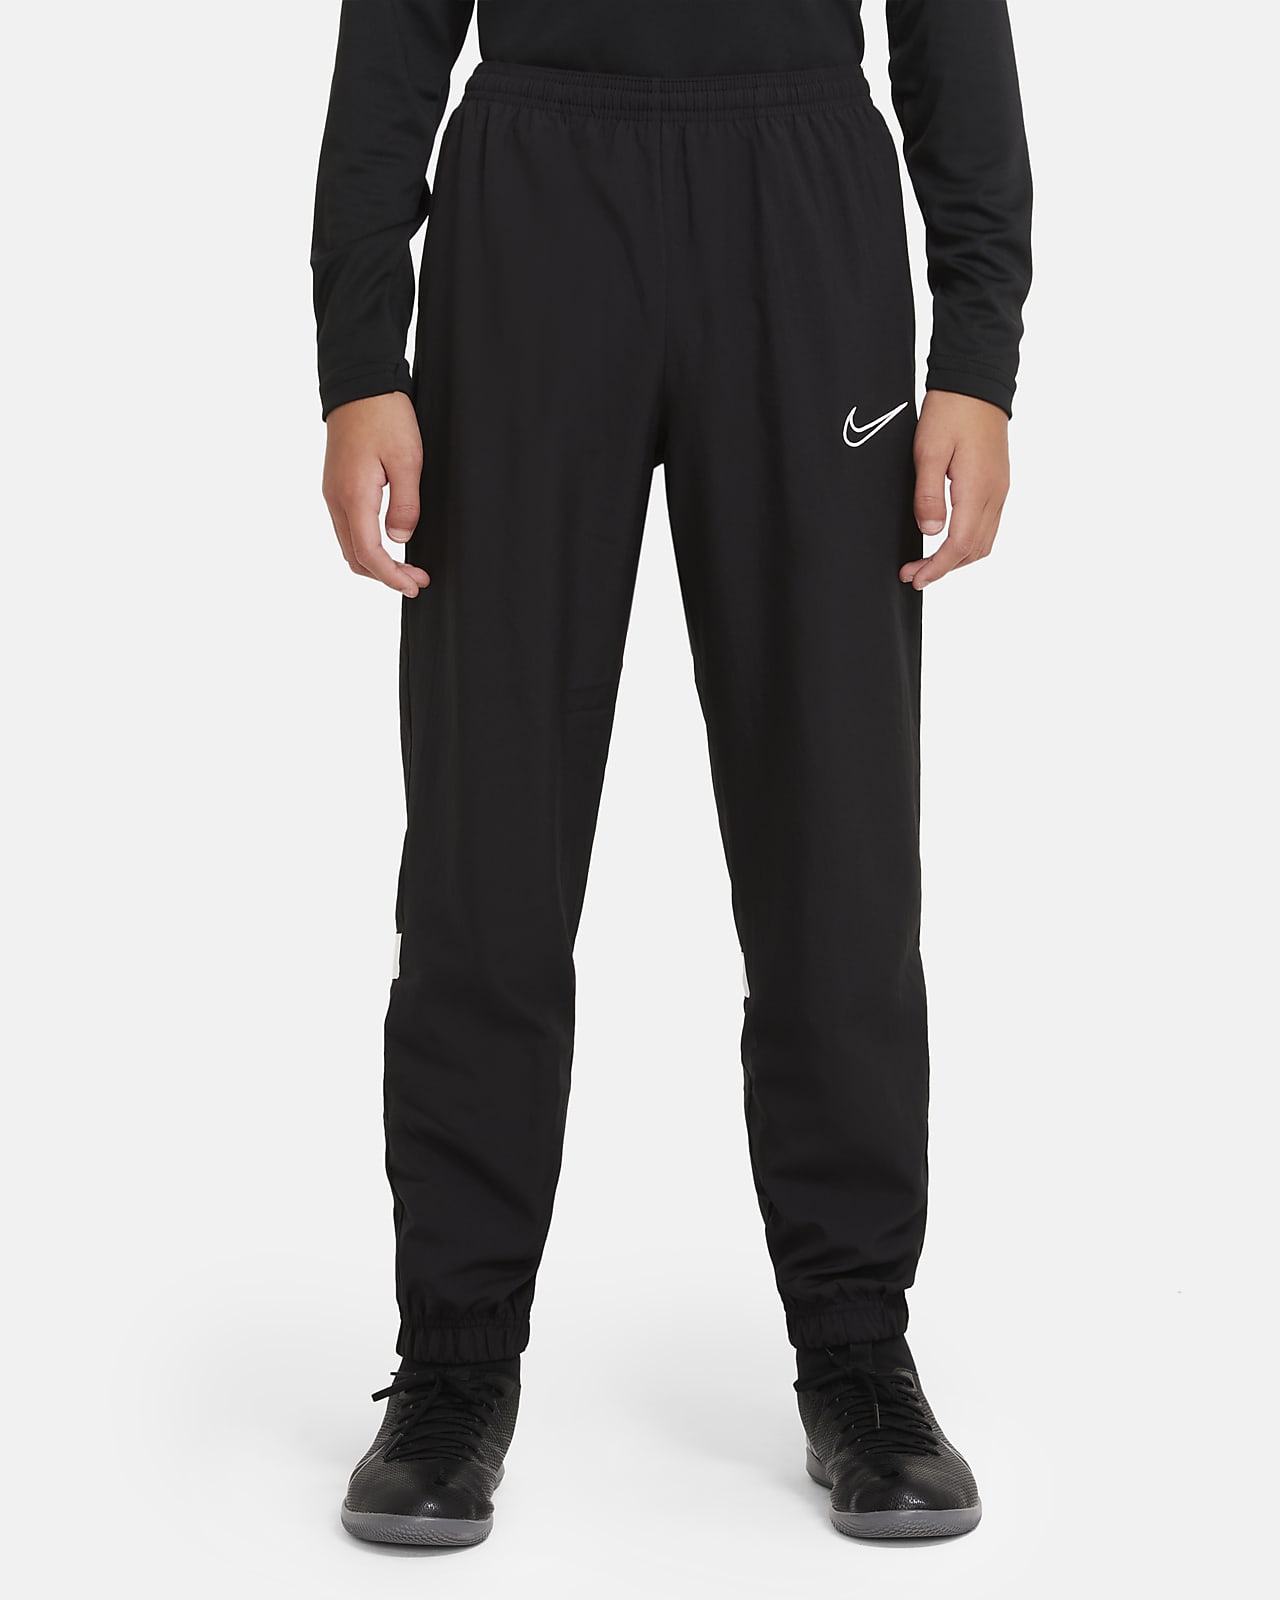 Nike Dri-FIT Academy Older Kids' Woven Football Tracksuit Bottoms